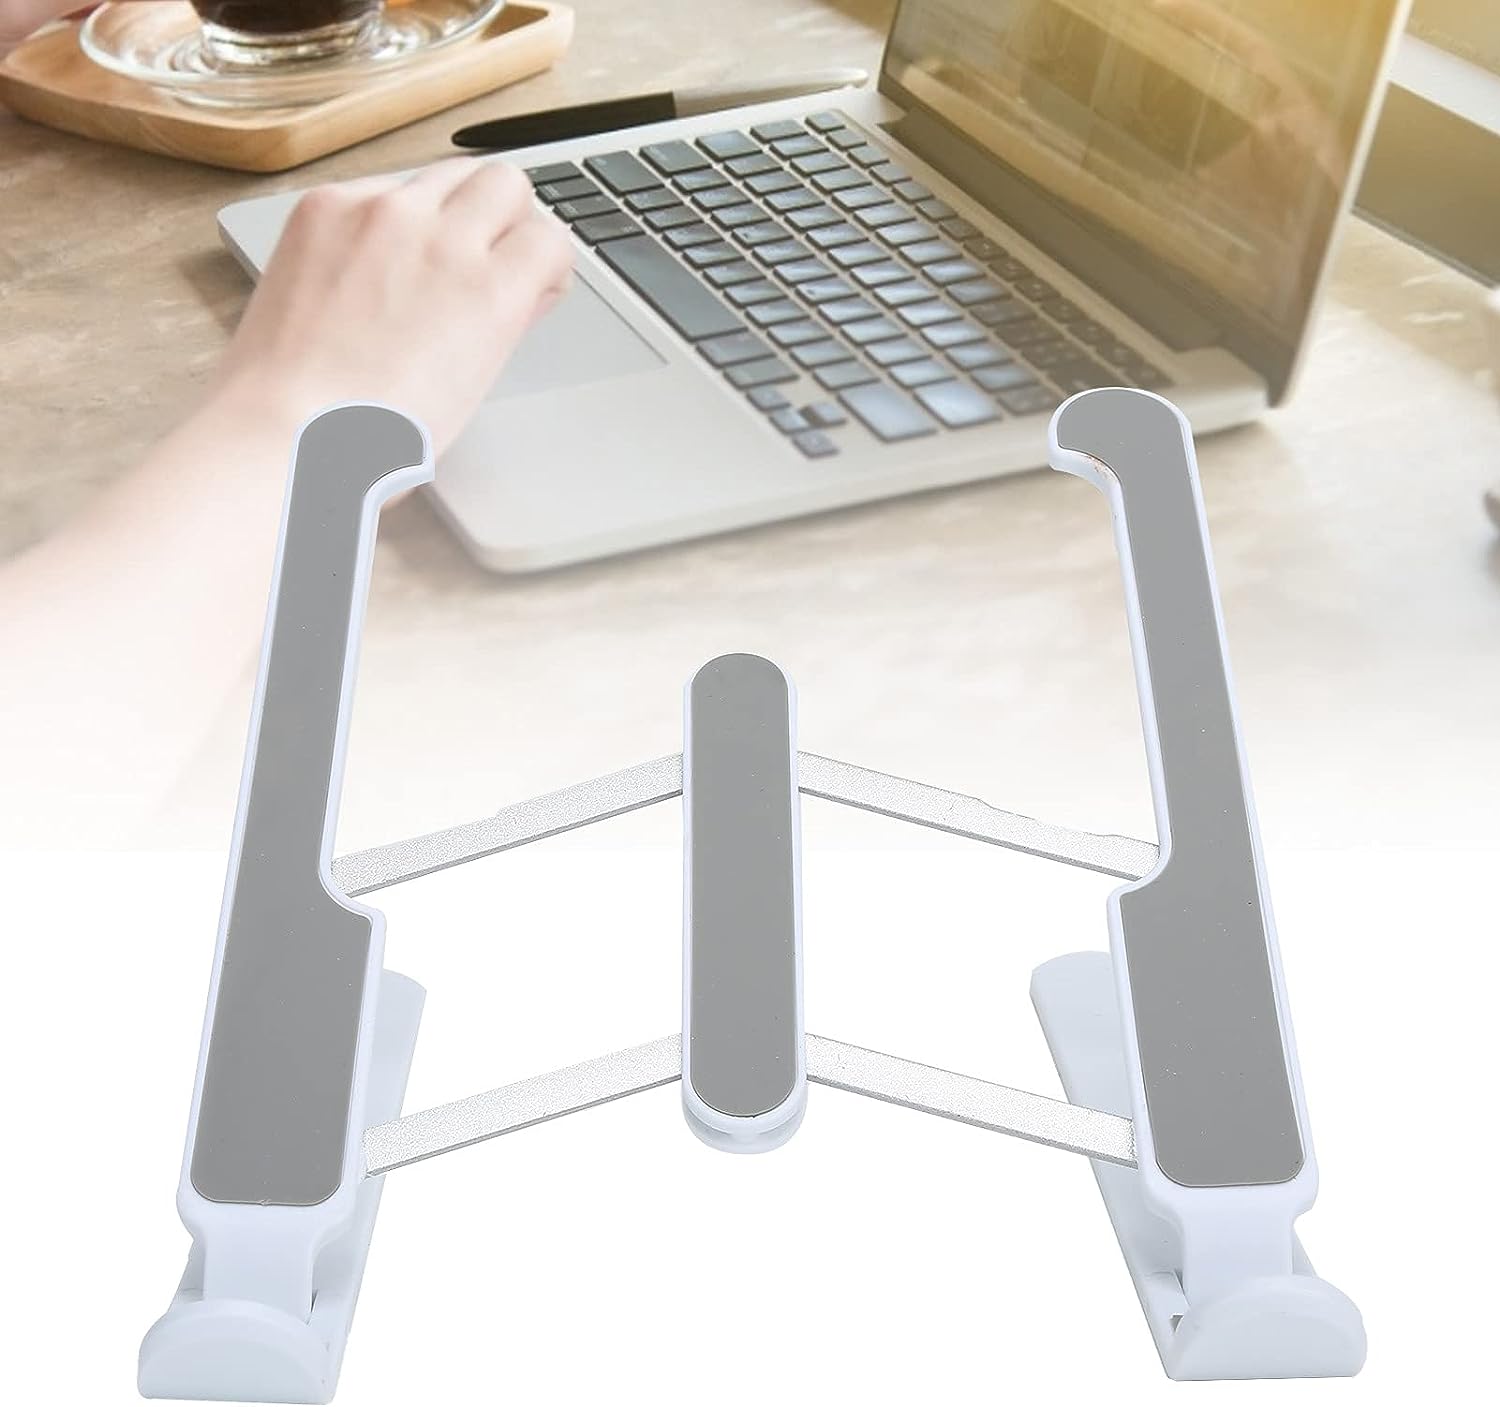 1320B ADJUSTABLE LAPTOP STAND HOLDER WITH BUILT-IN FOLDABLE LEGS AND HIGH QUALITY FIBRE